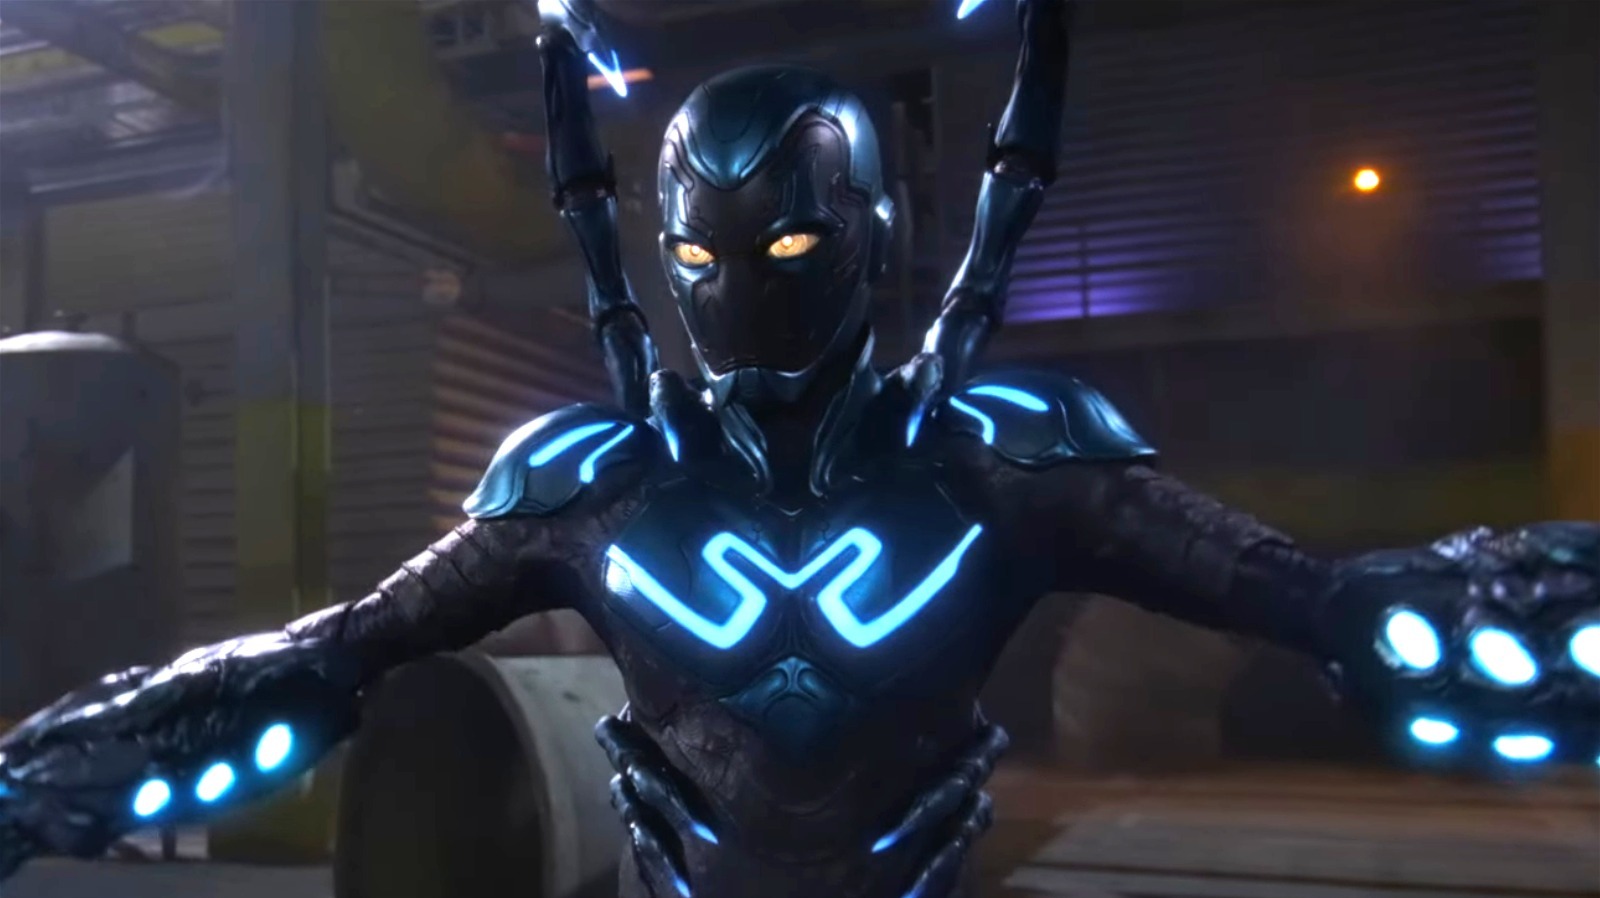 Blue Beetle trailer: a first look at DC's newest superhero movie